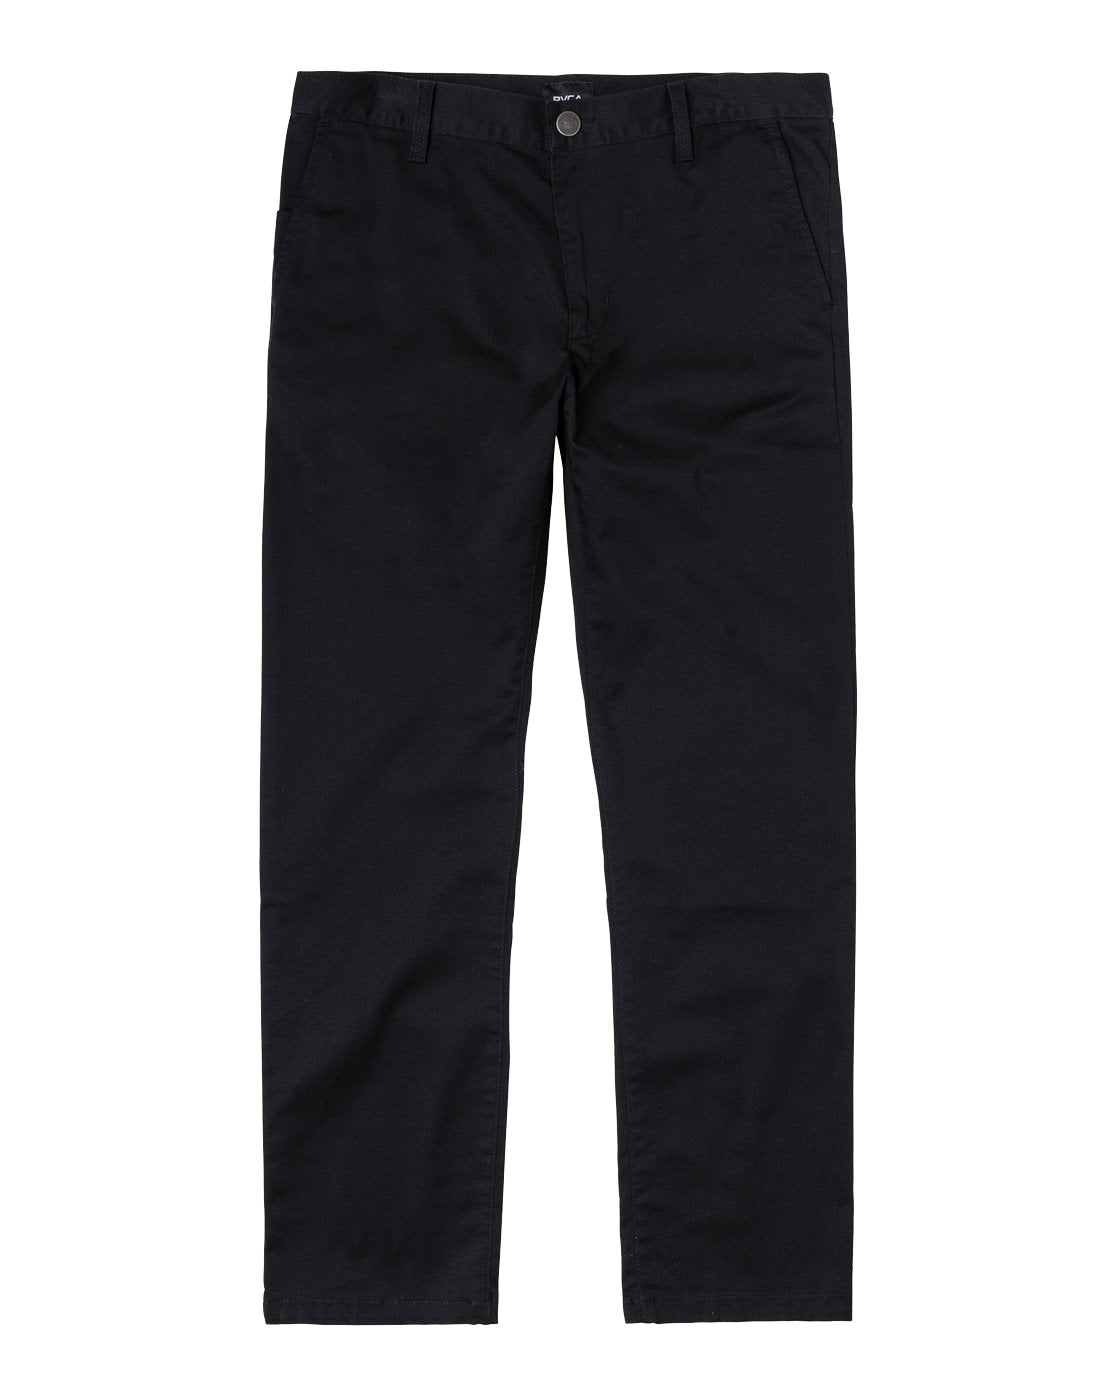 RVCA Weekend Stretch Straight Fit Pant BLK 30